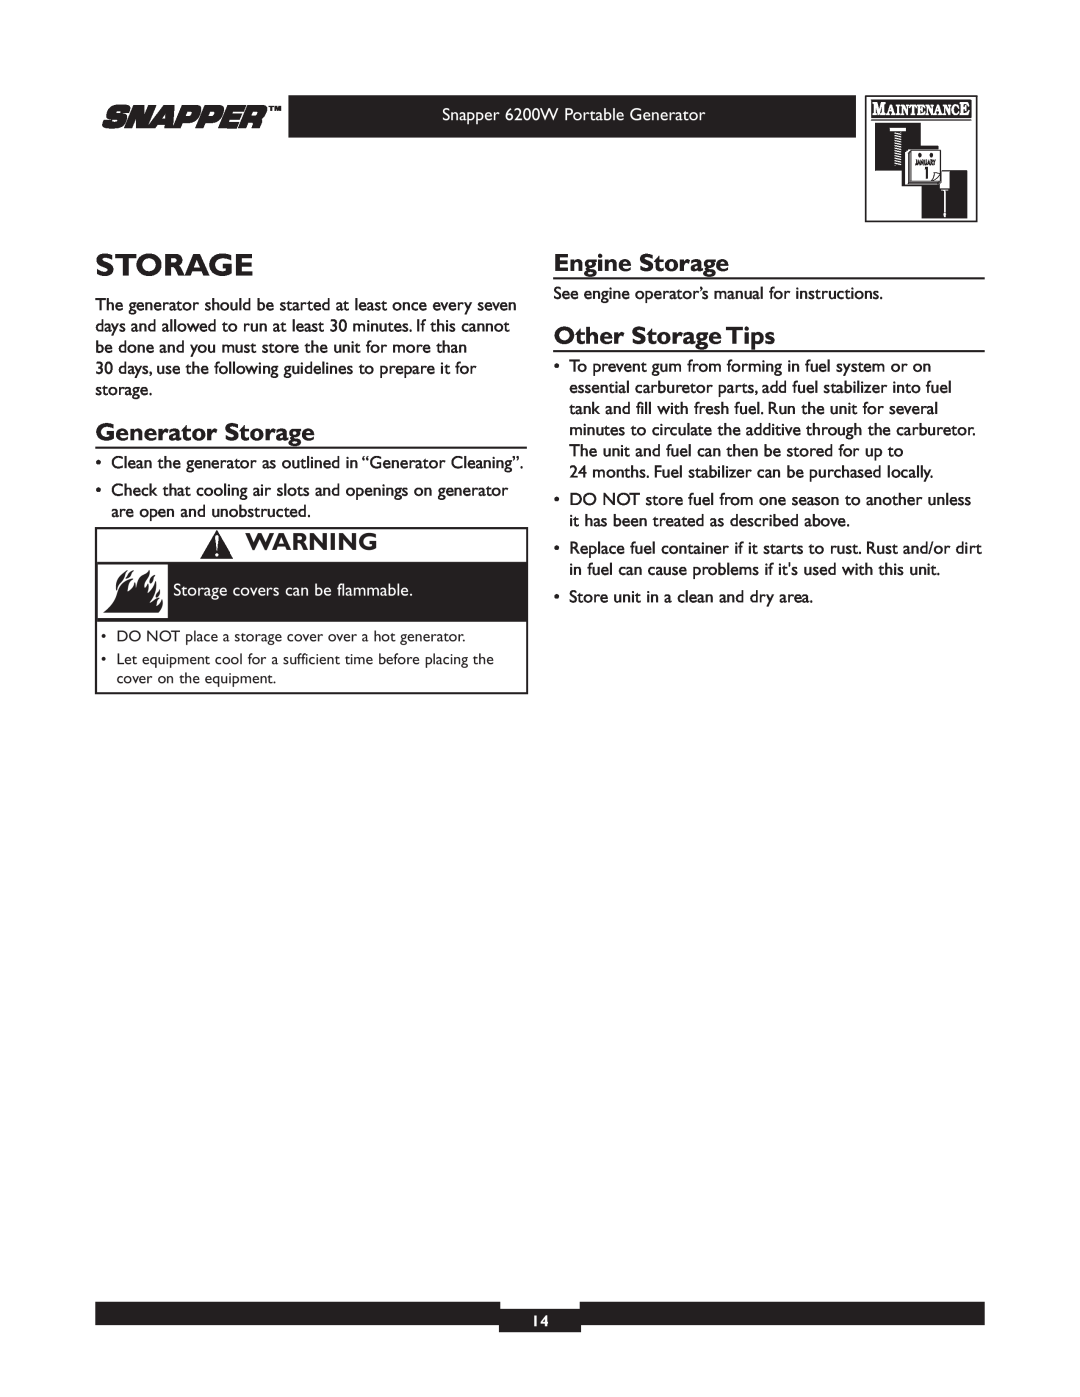 Snapper 30216 manual Generator Storage, Engine Storage, Other Storage Tips, Storage covers can be flammable 